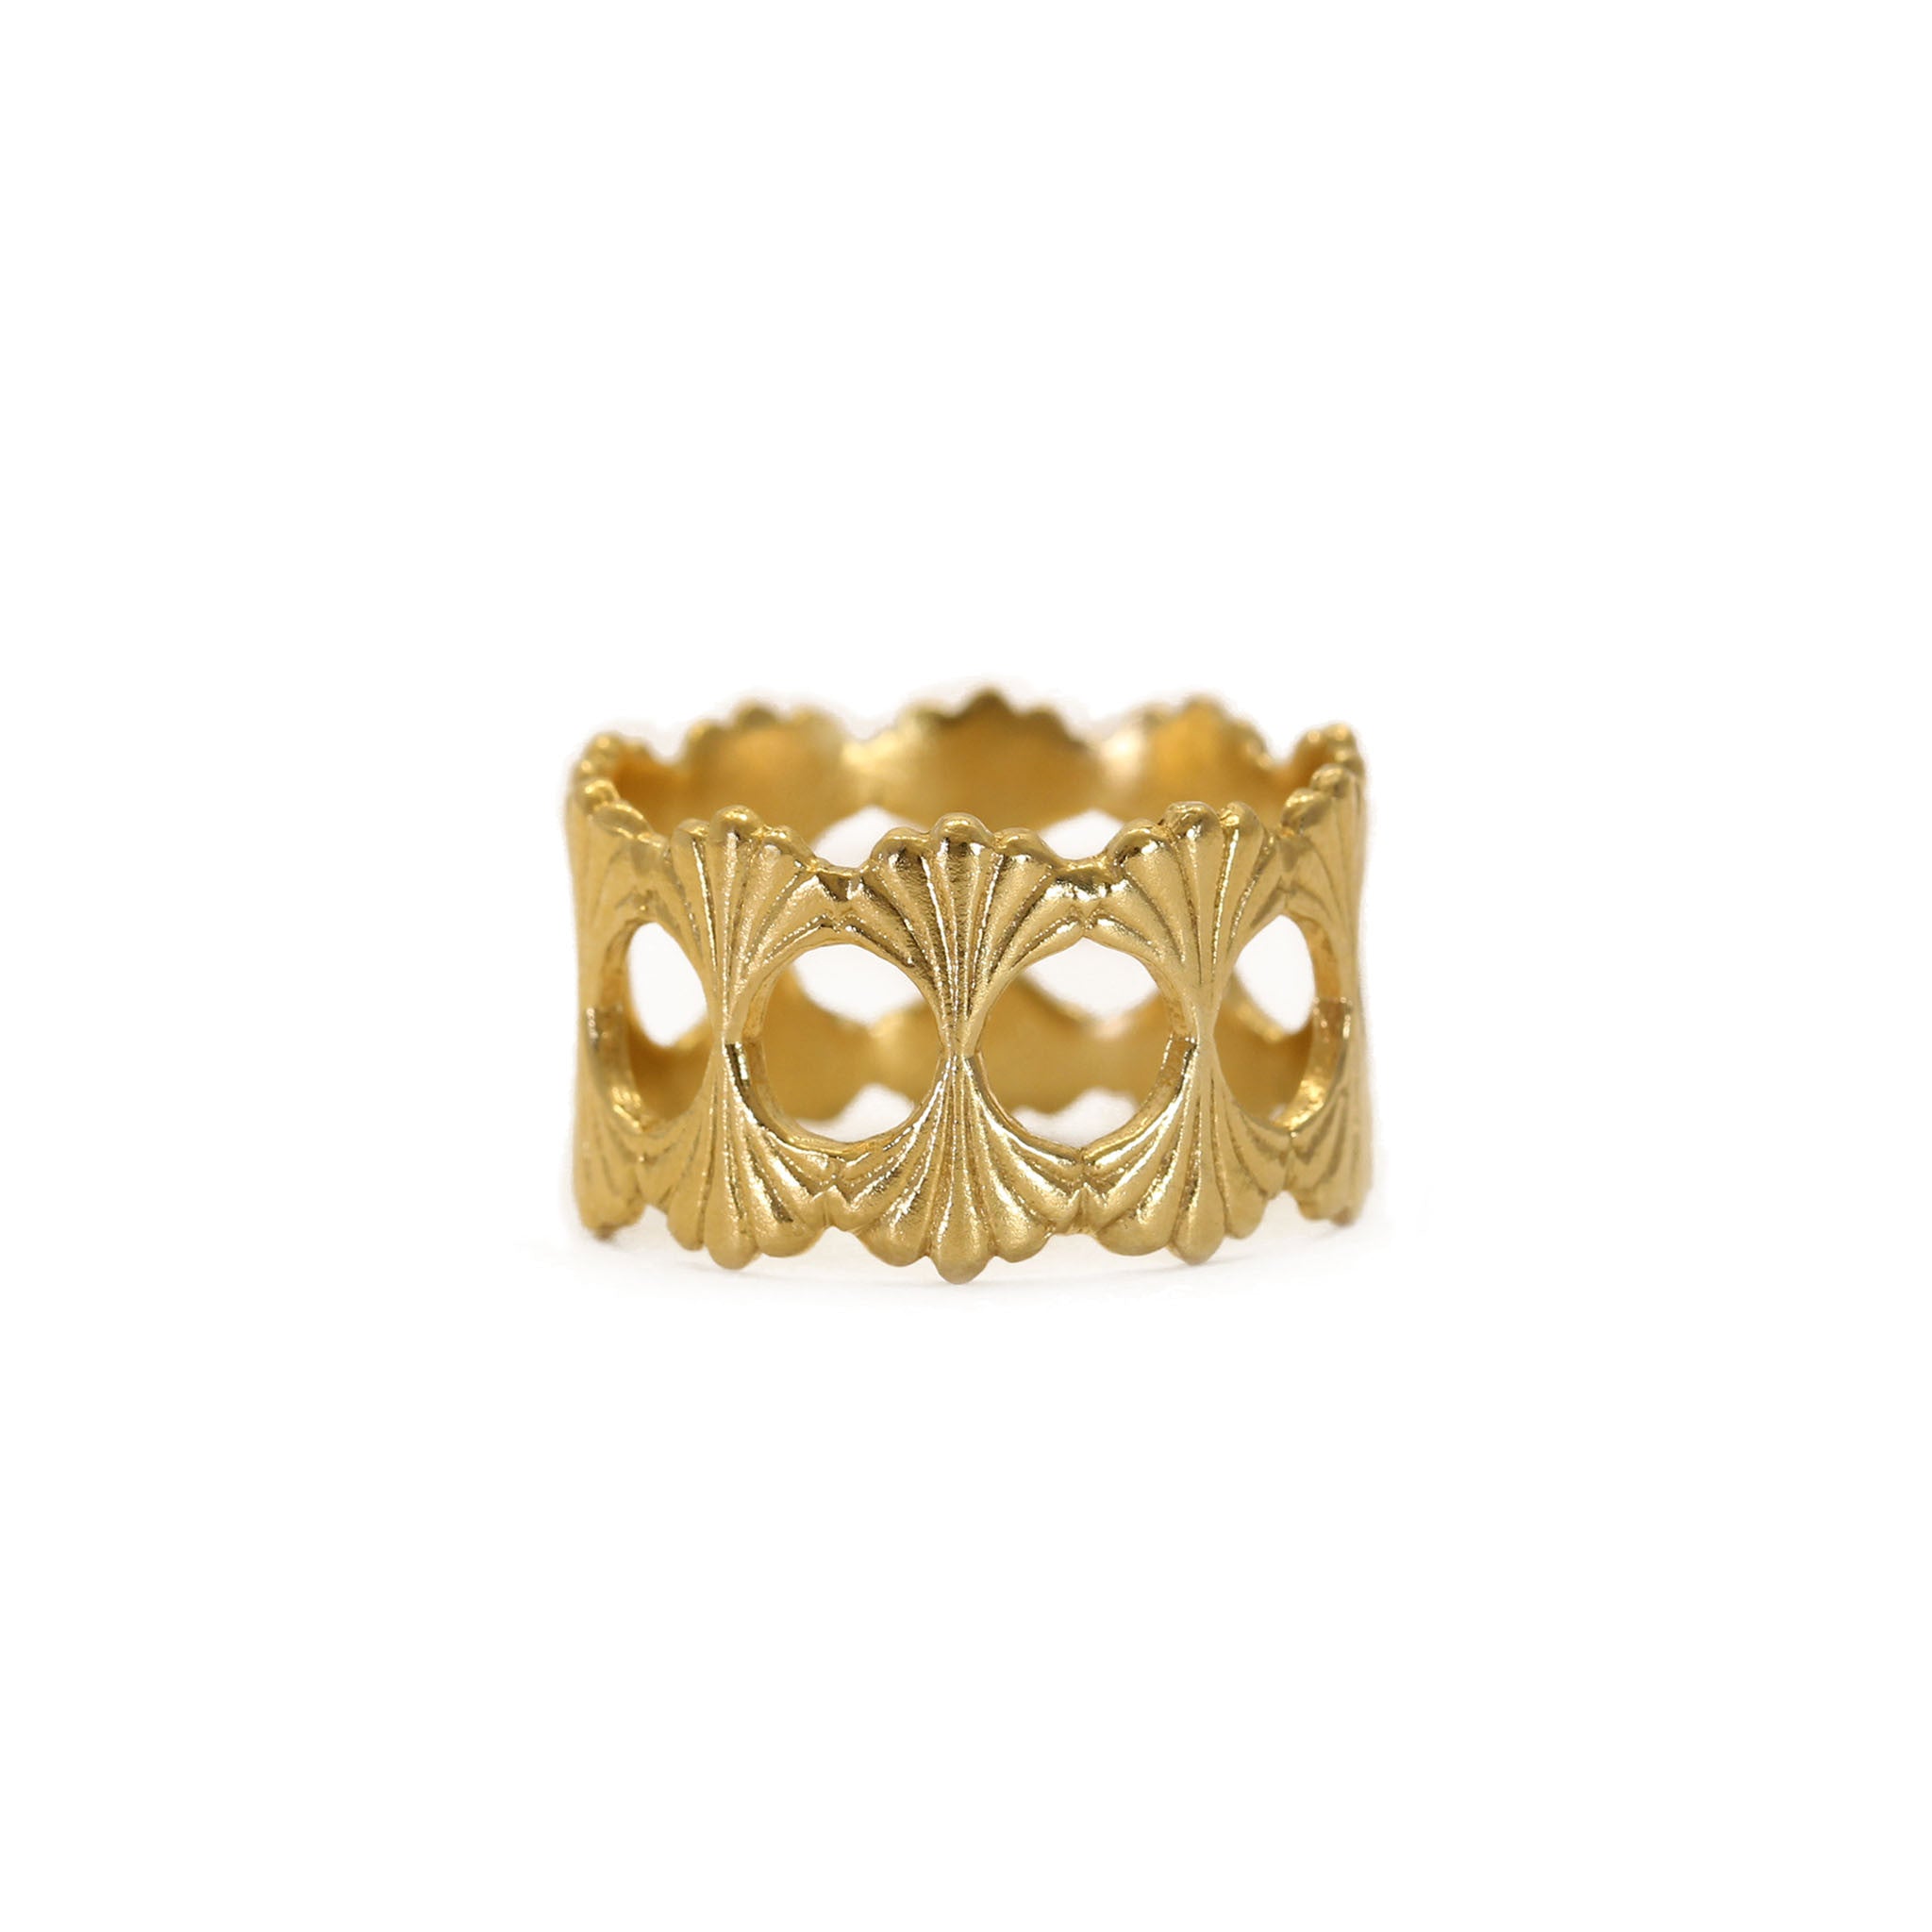 Temple Filigree Ring in yellow gold